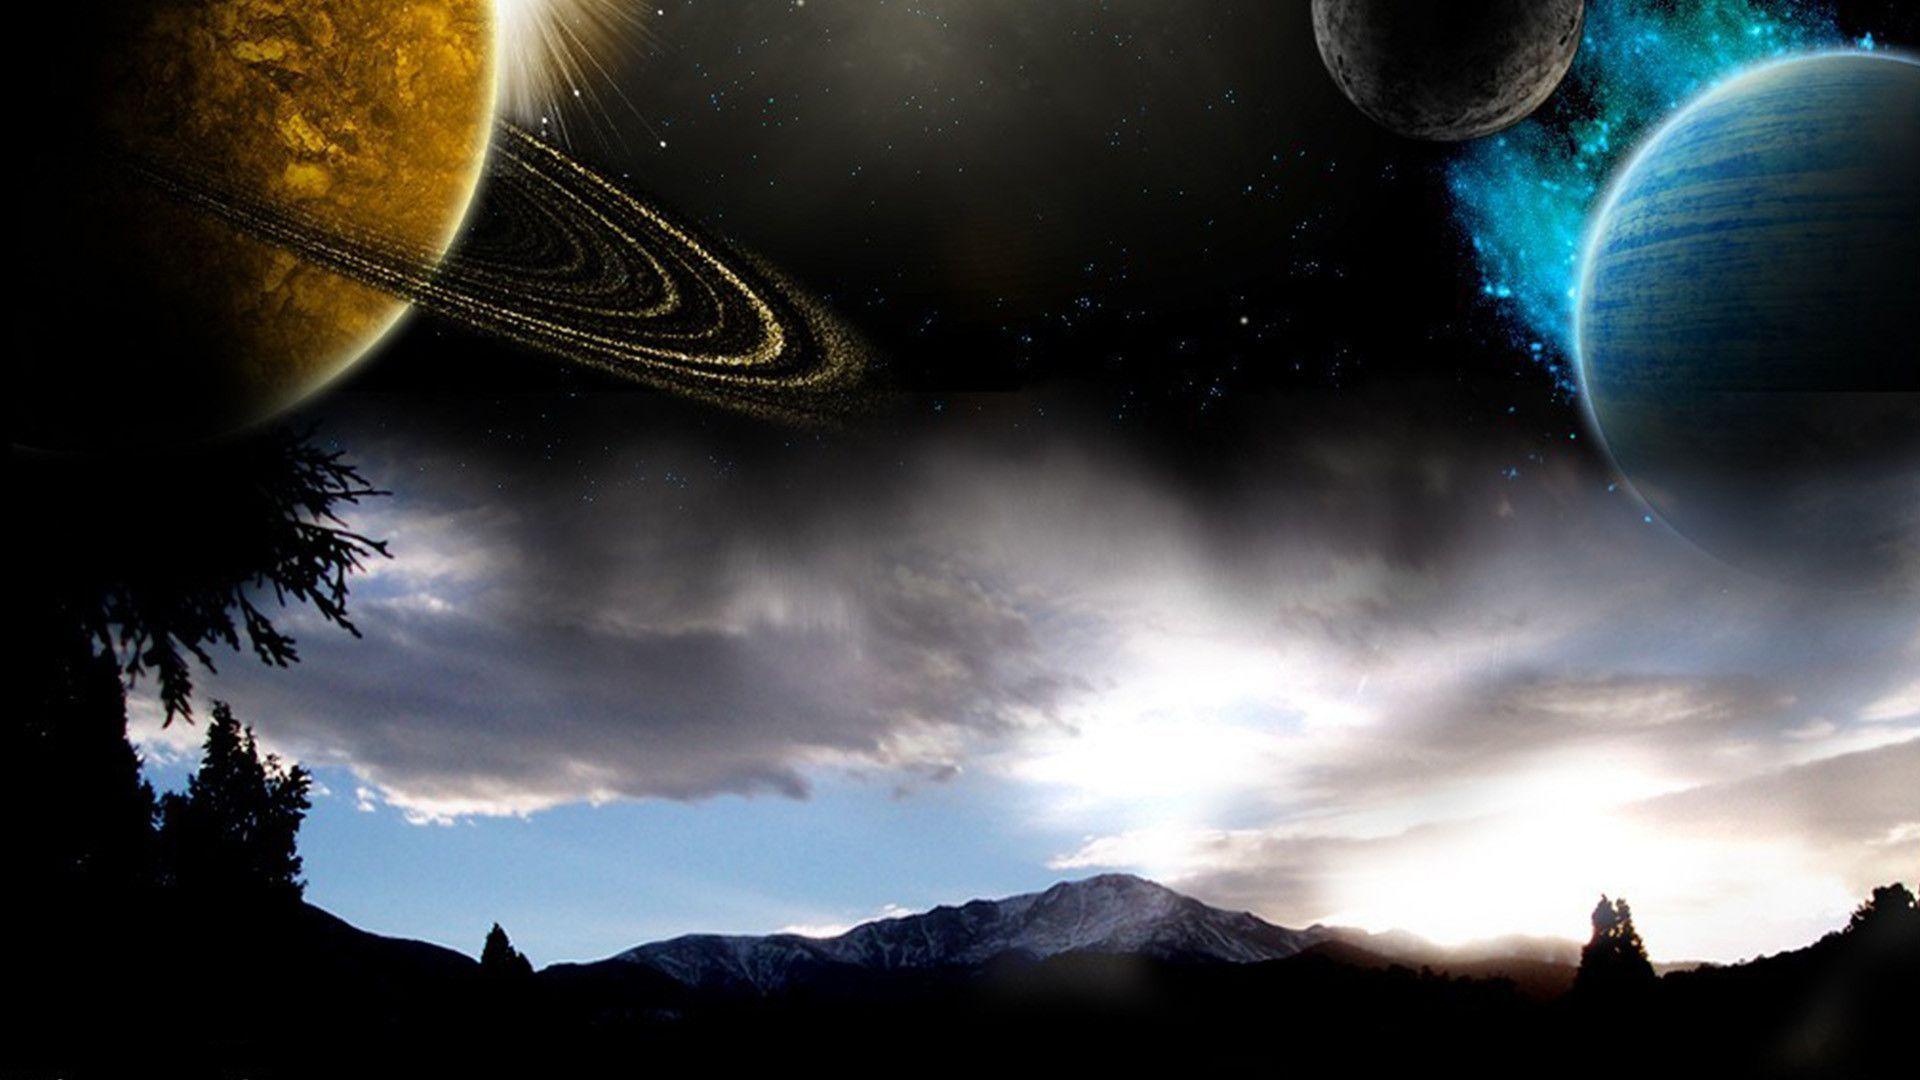 space art wallpaper 1920x1080 « search results «Universe, space